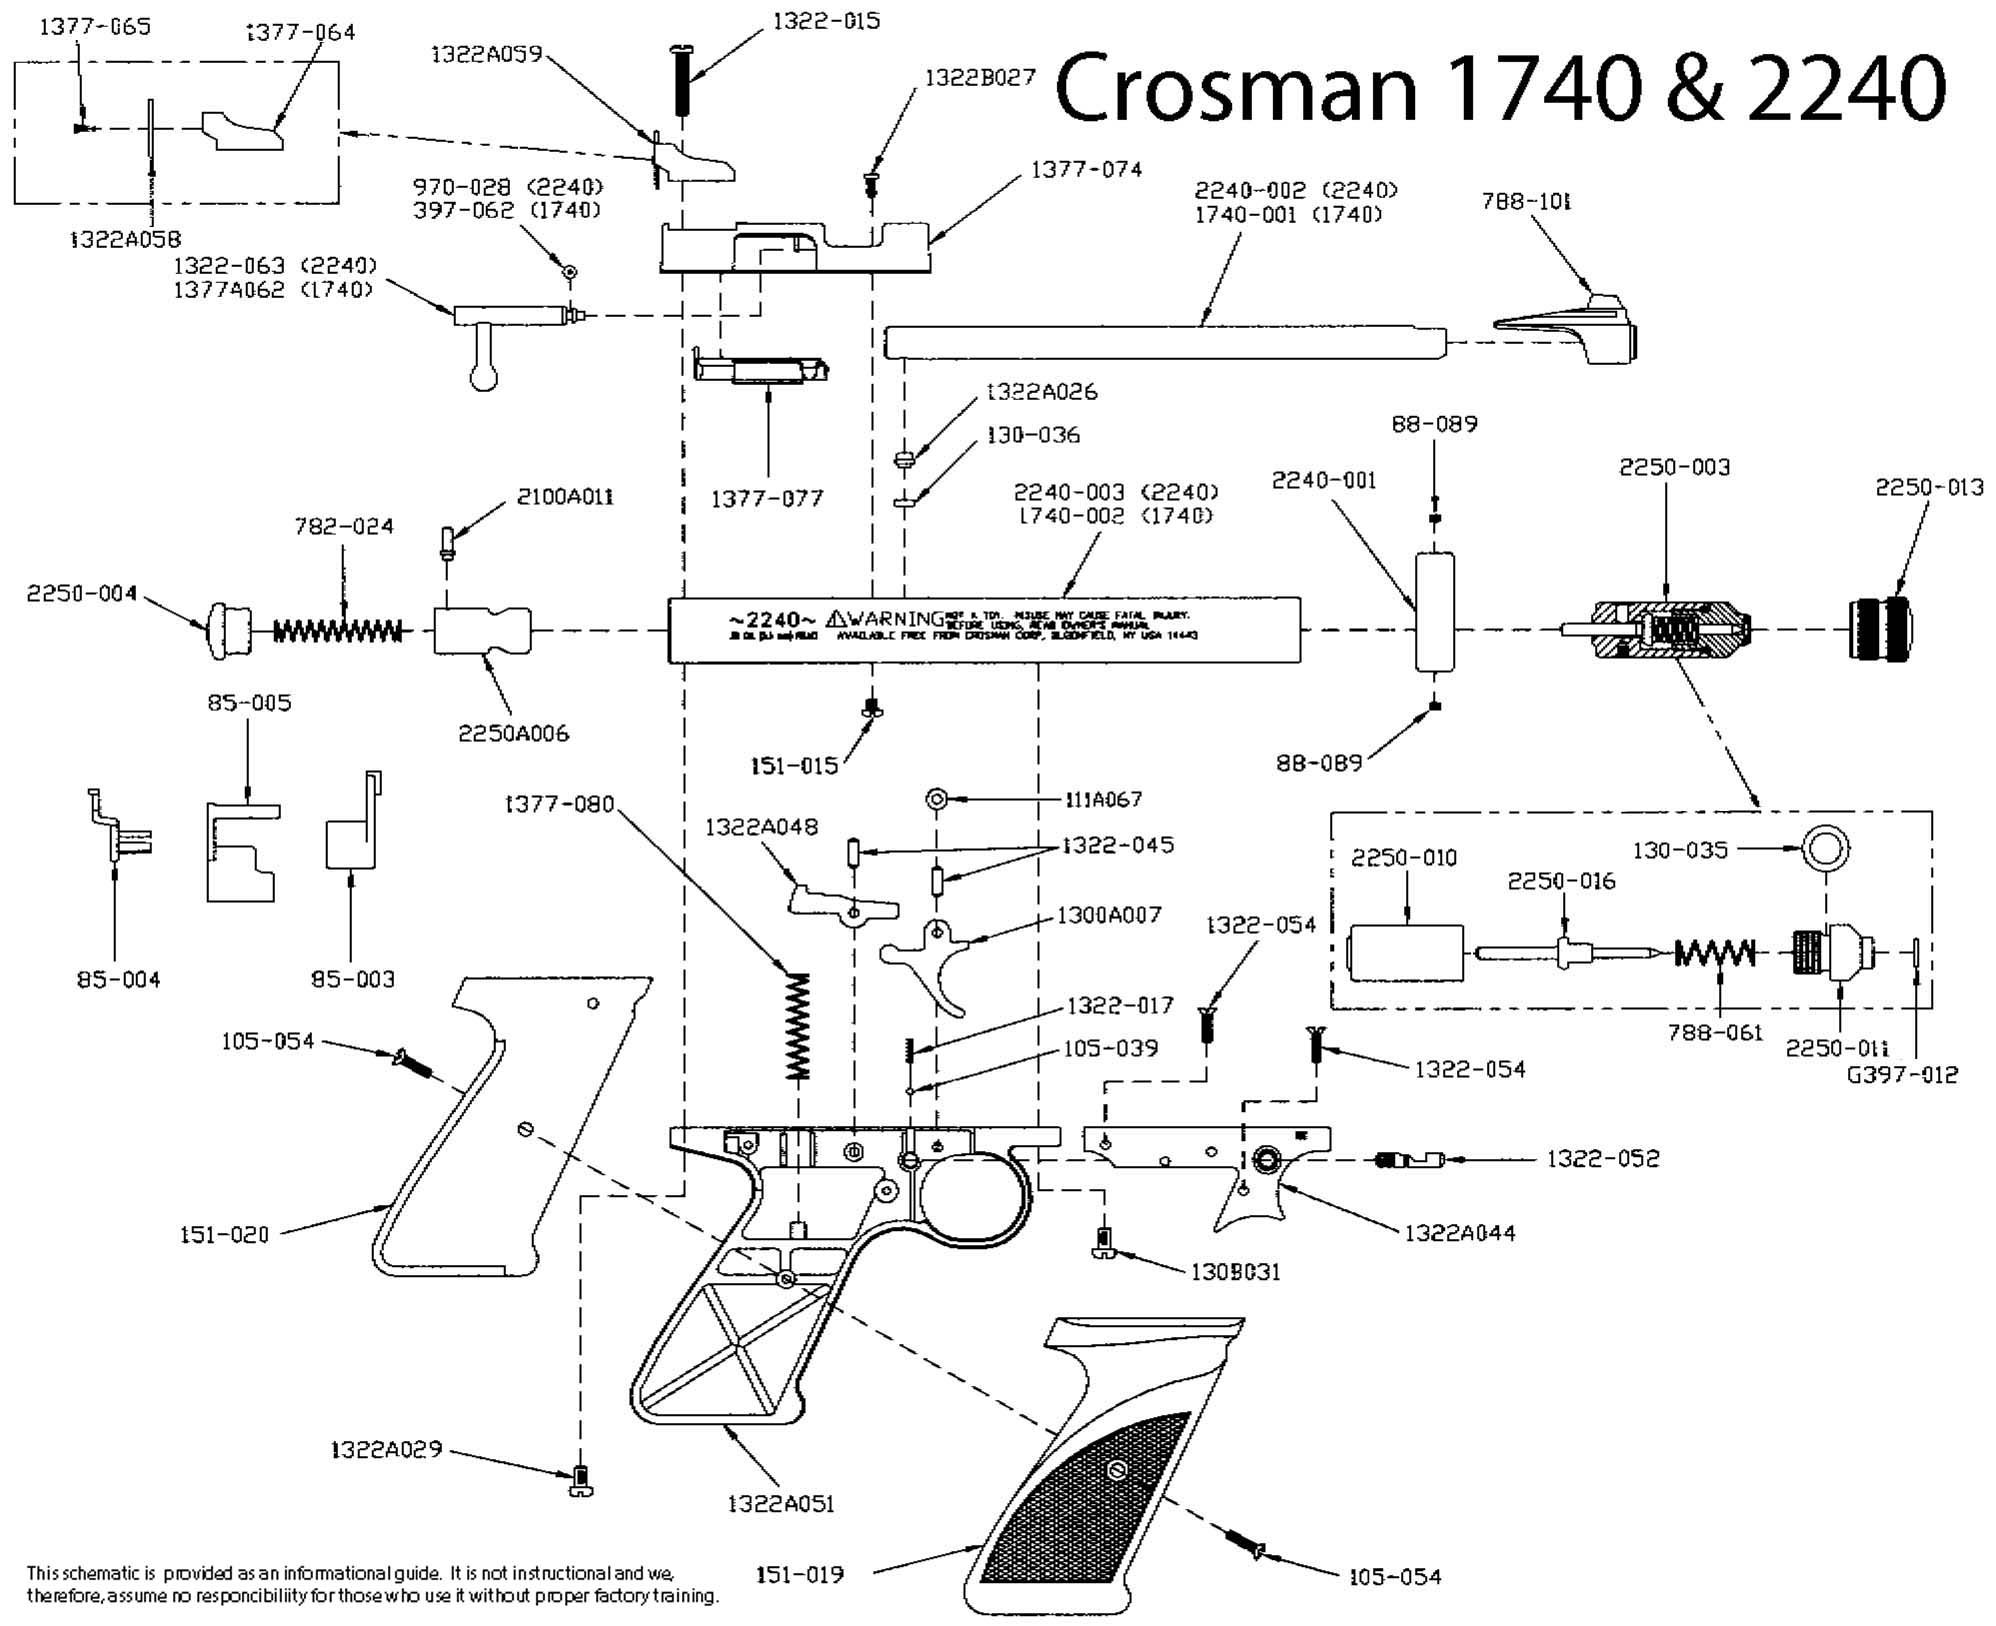 1740 and 2240 Schematic